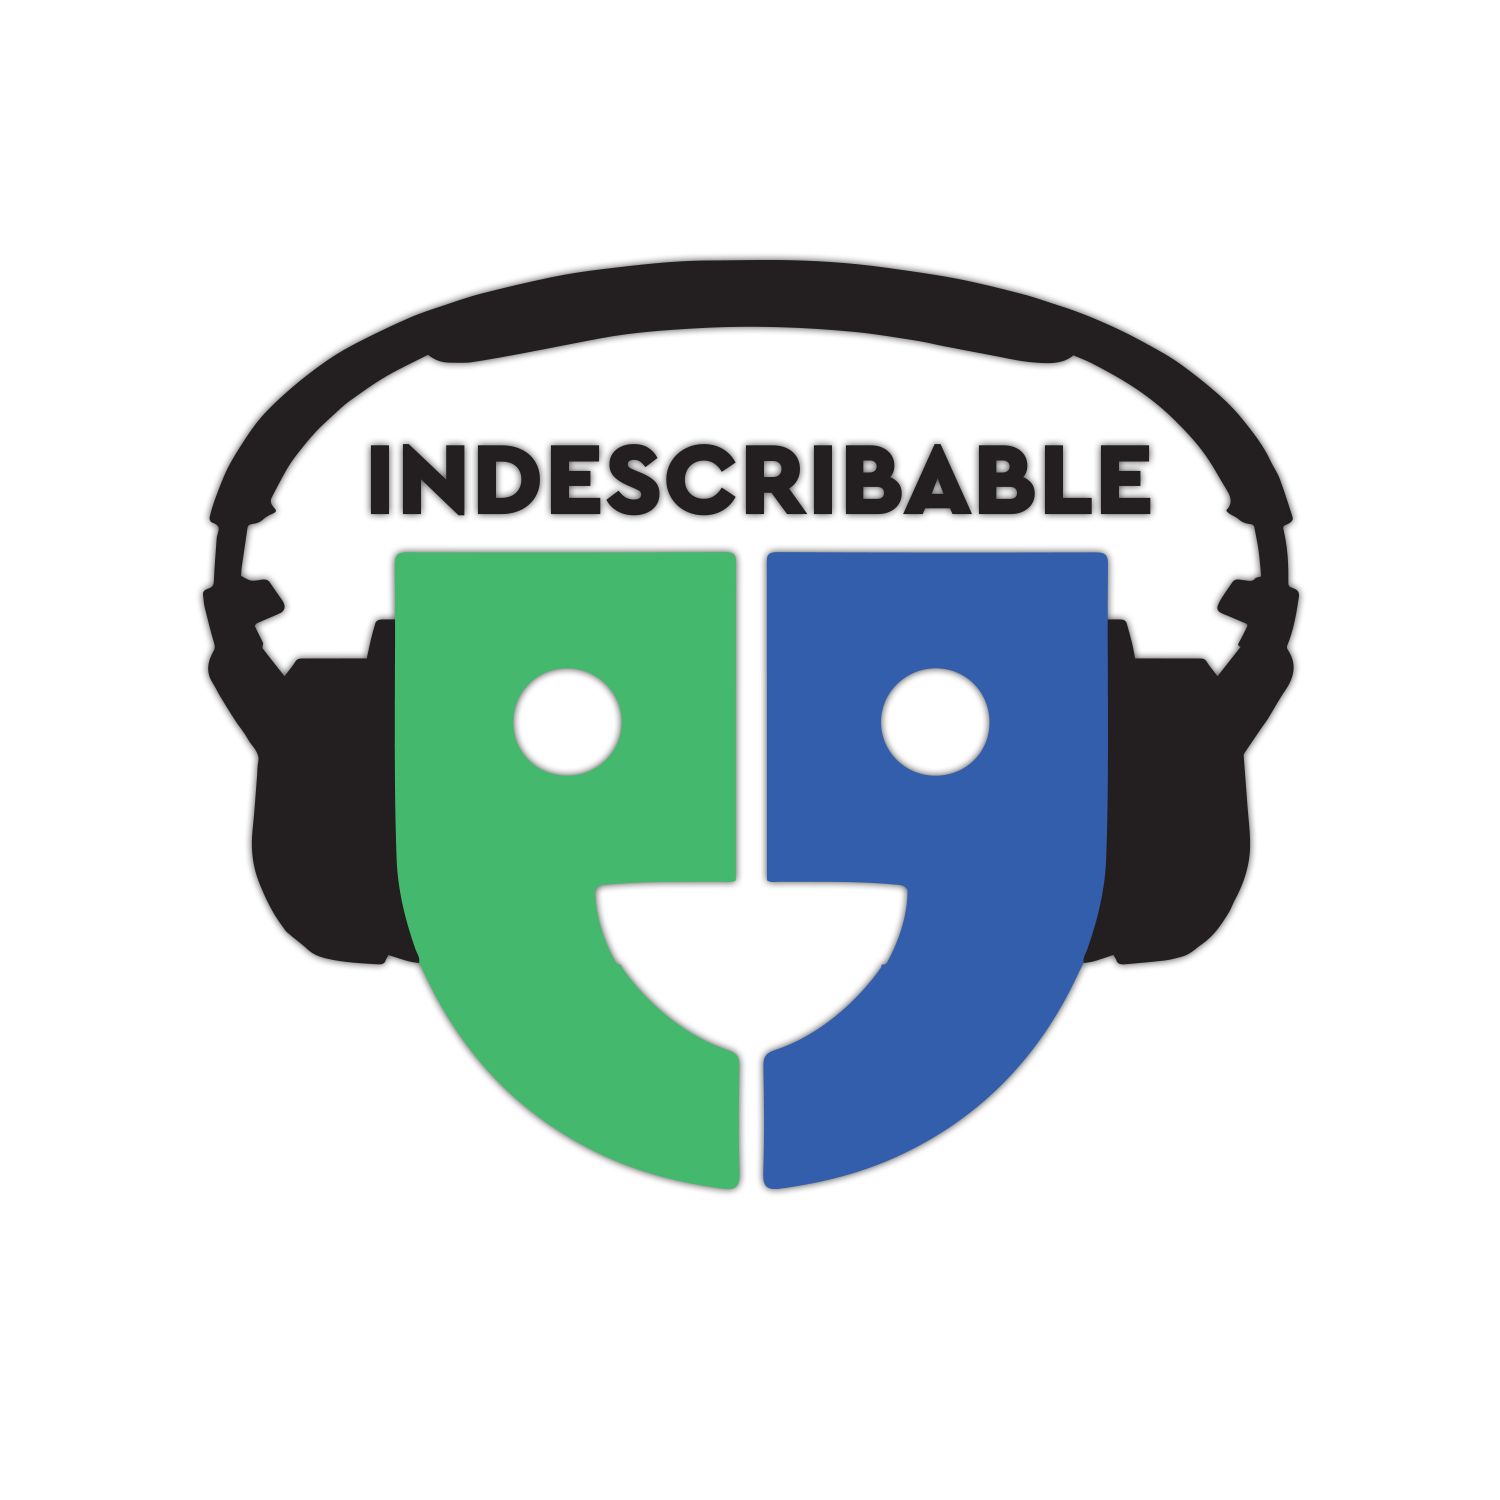 Indescribable: The Podcast